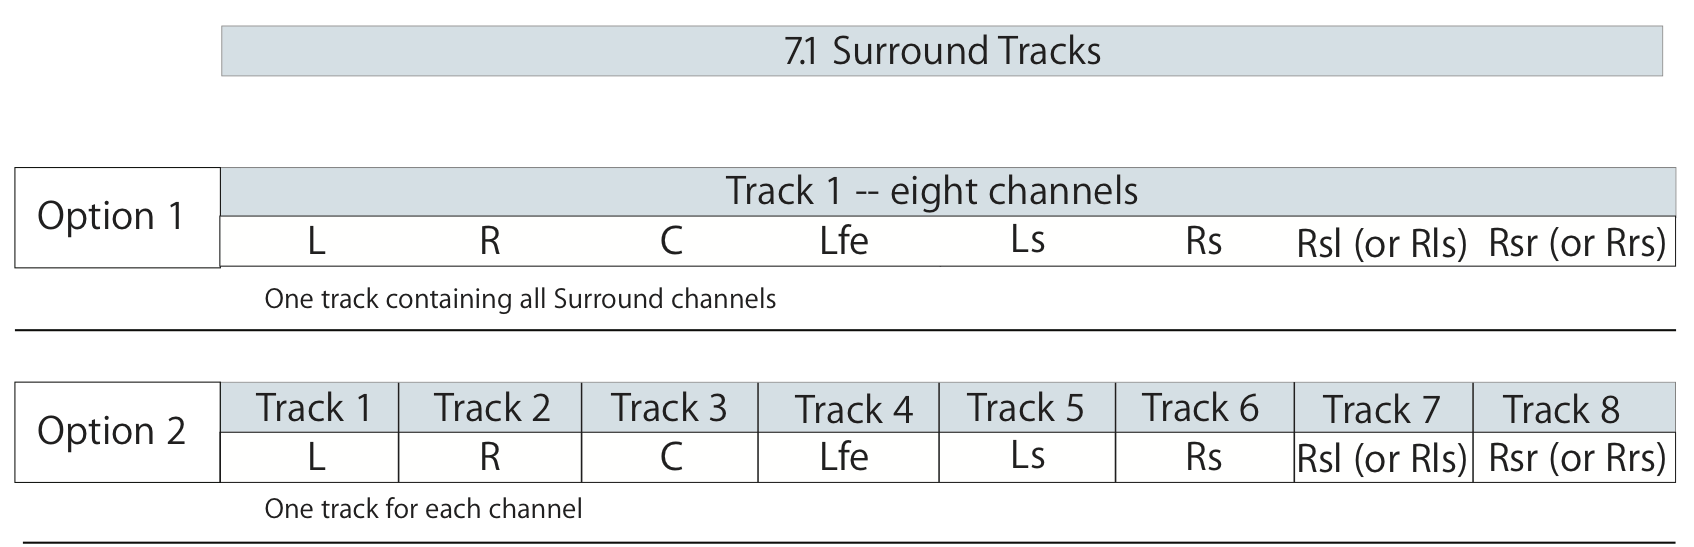 image of table showing audio channel assignments